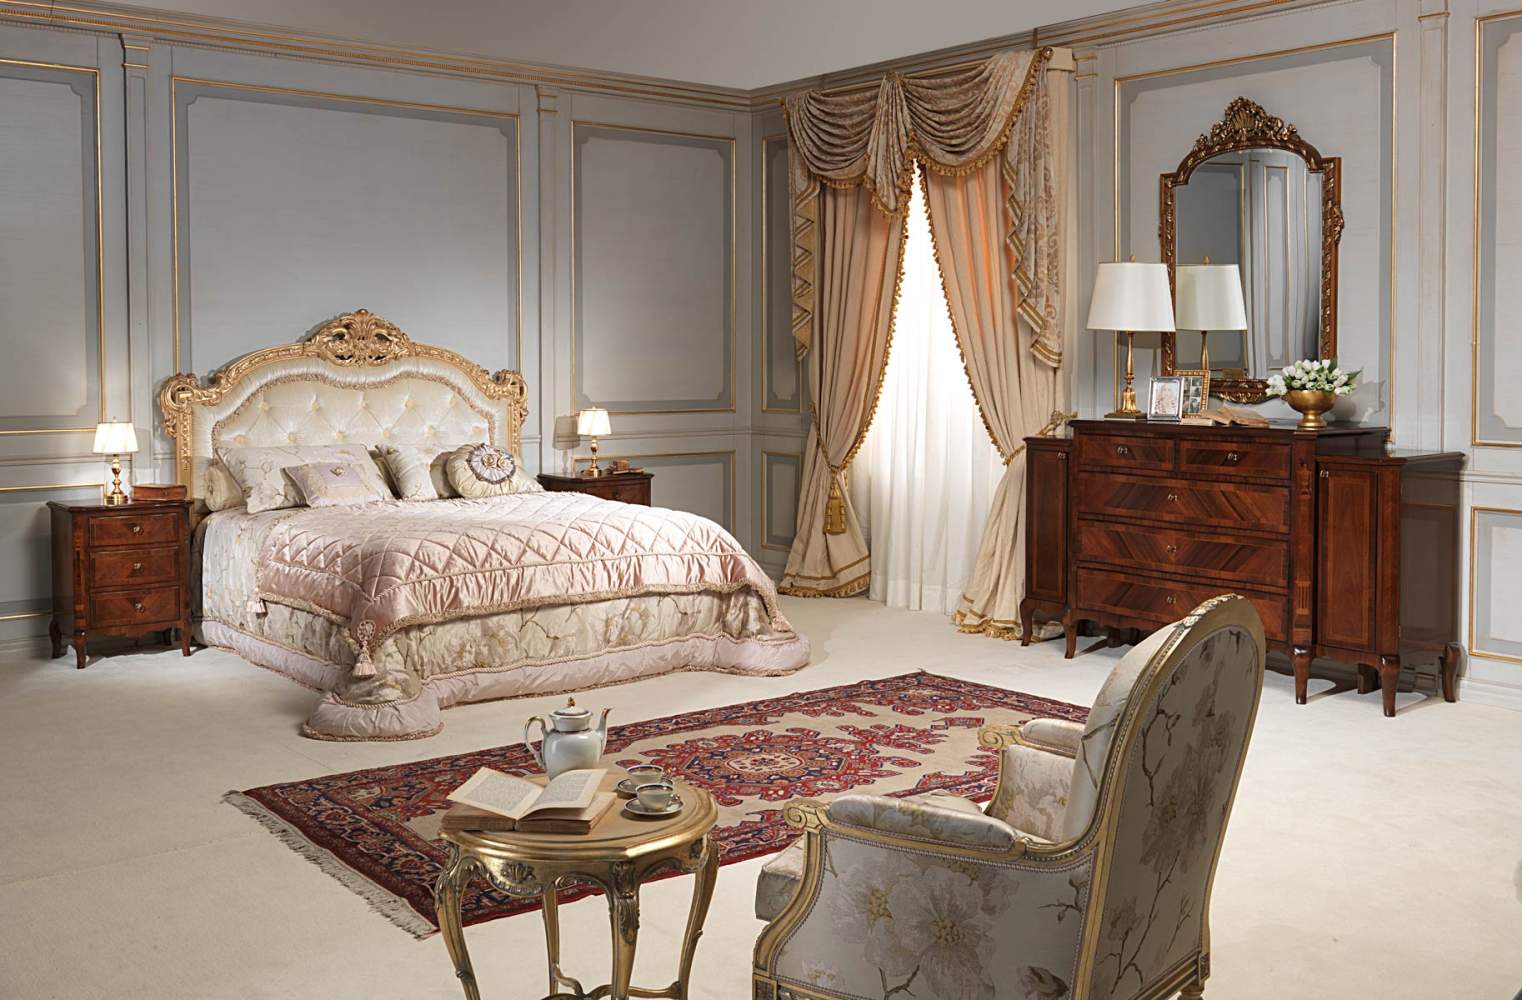 Classic french bedroom 19th century style